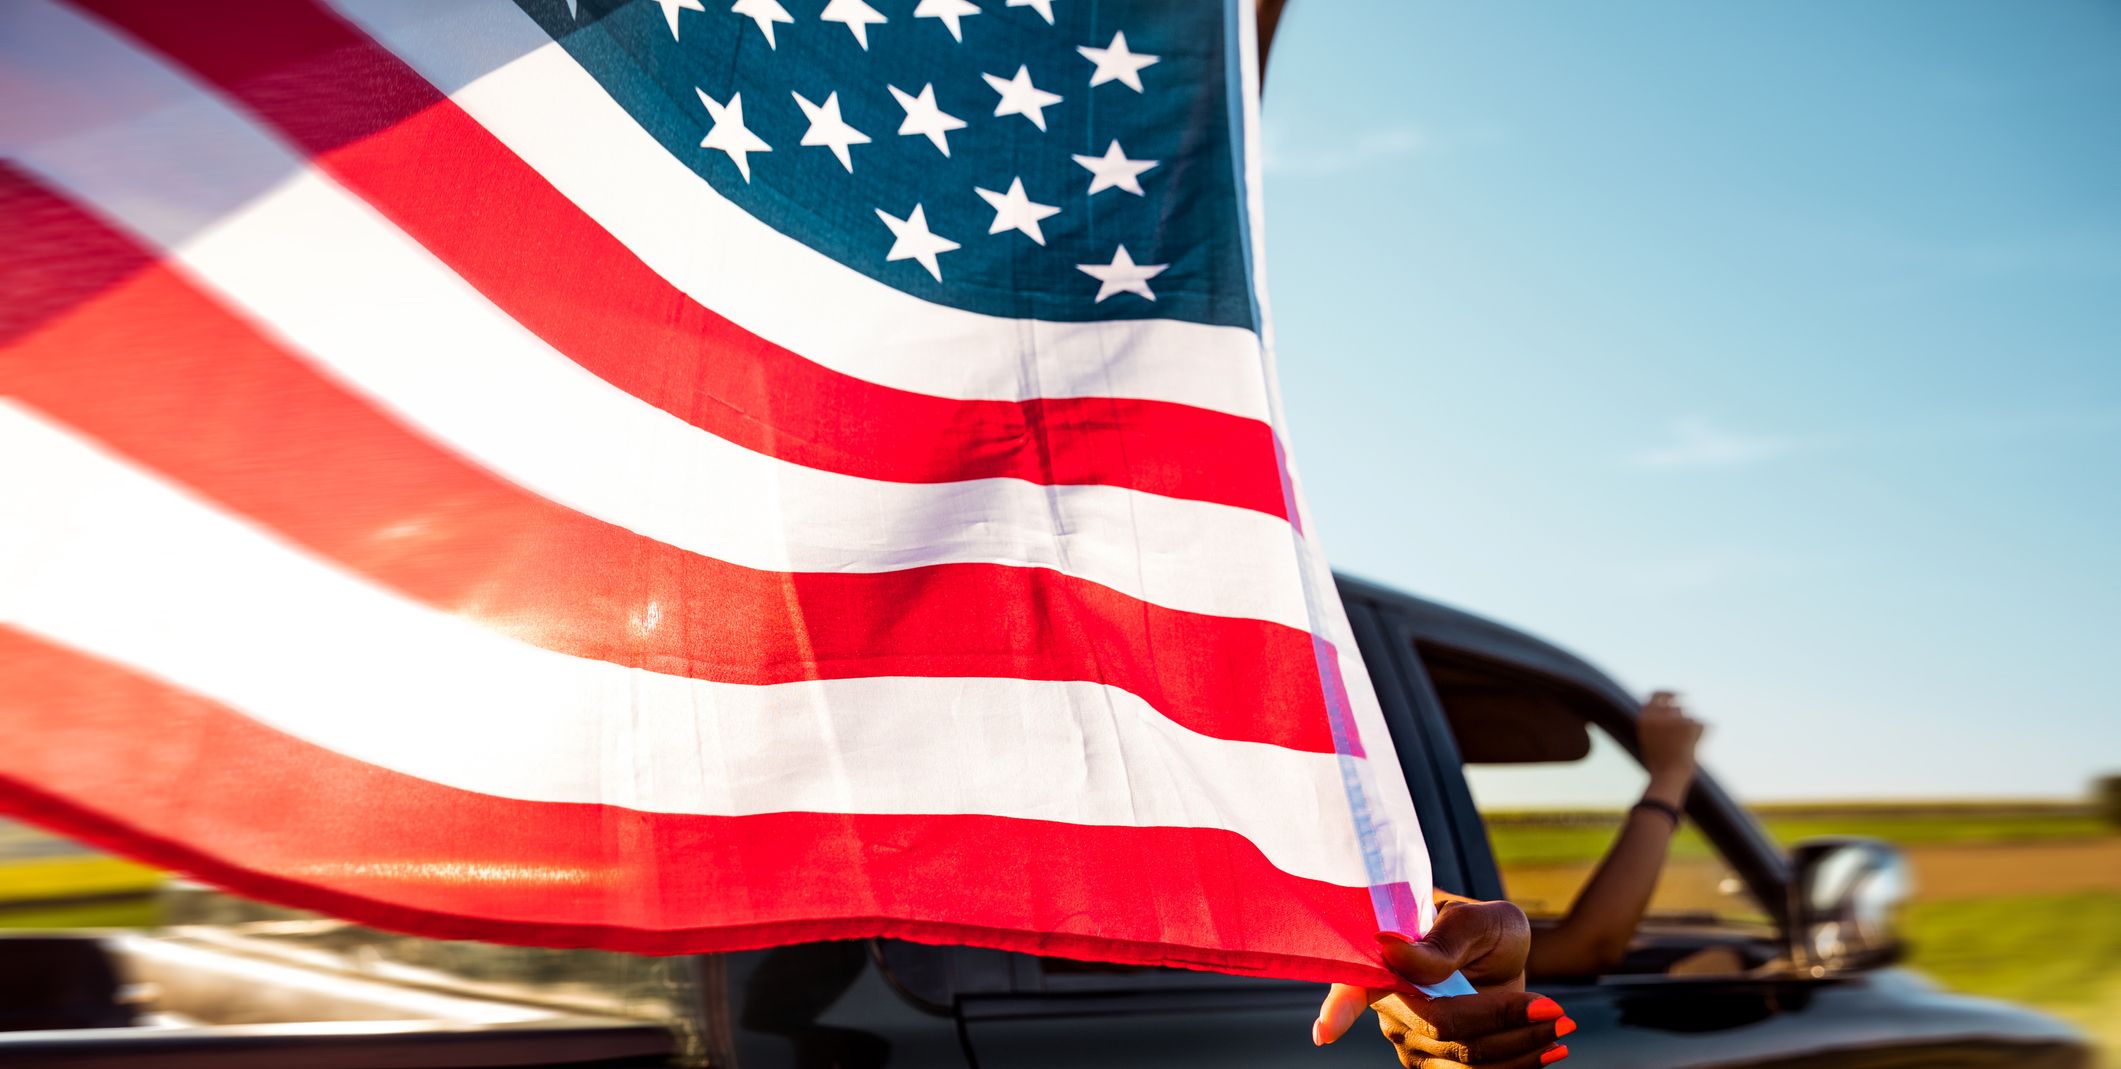 How to Display the American Flag Correctly on Your Car, Truck, or Motorcycle